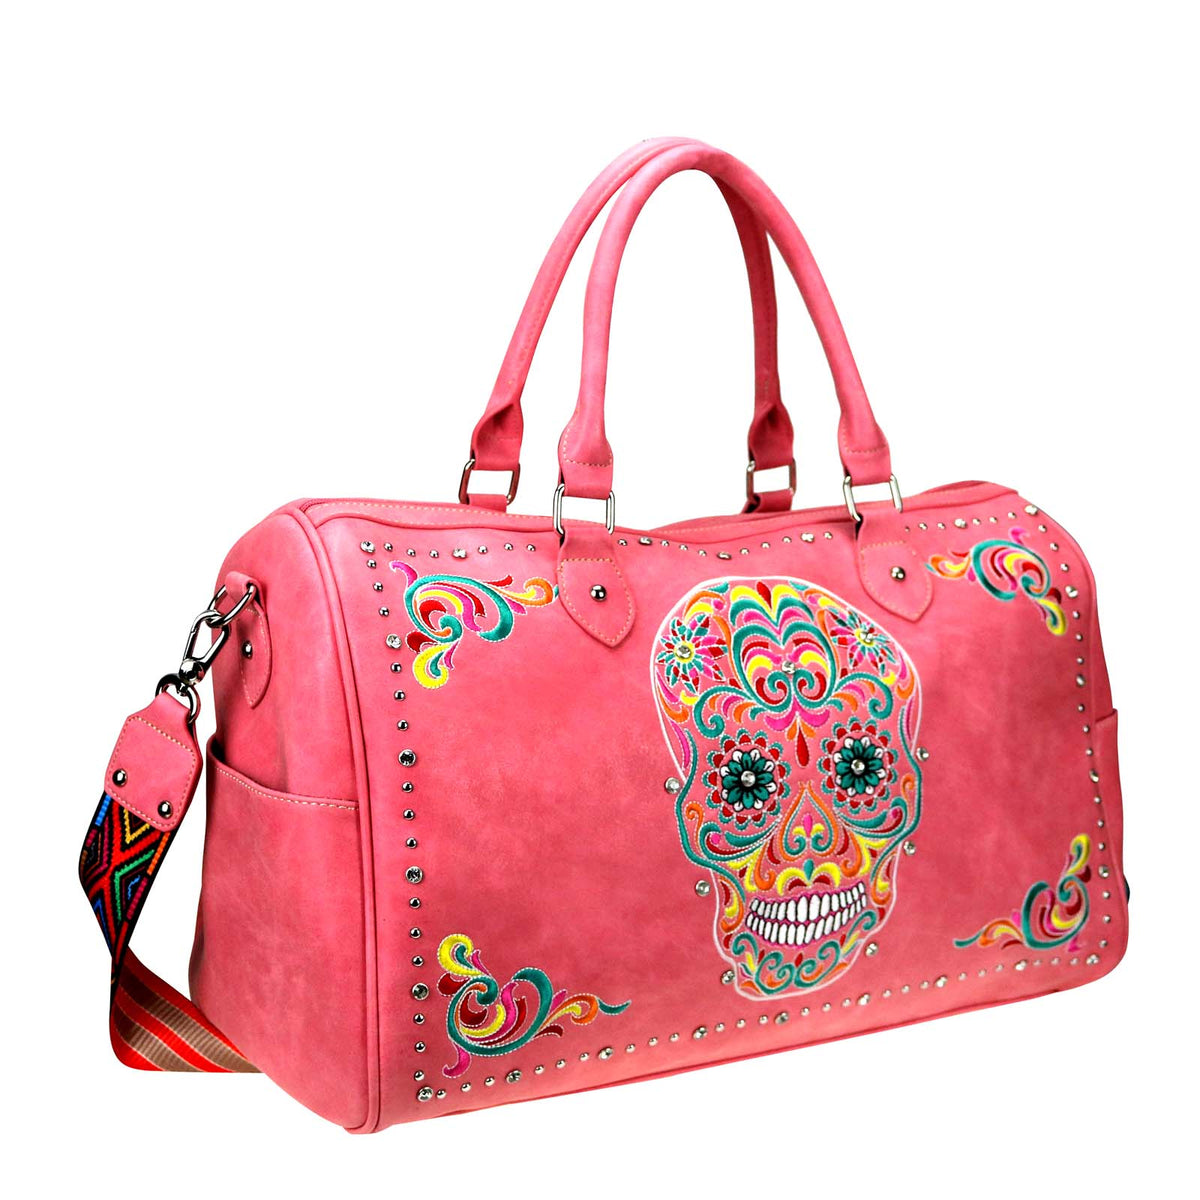 Want a Unique Duffle Bag? Take a look at our Embroidered Sugar Skull Duffle featuring a Vibrant Sugar Skull design accented with silver and crystal studs, top zipper closure, open button closure side pockets, interior zippered pocket and multiple open pockets, metal feet for protection and stability, detachable/adjustable shoulder strap, double handle, 20" x 8" x 12.5" dimensions. Gothic, Halloween, Punk, Alternative, Emo, Skull, Artistic, Unique, Statement Piece. 